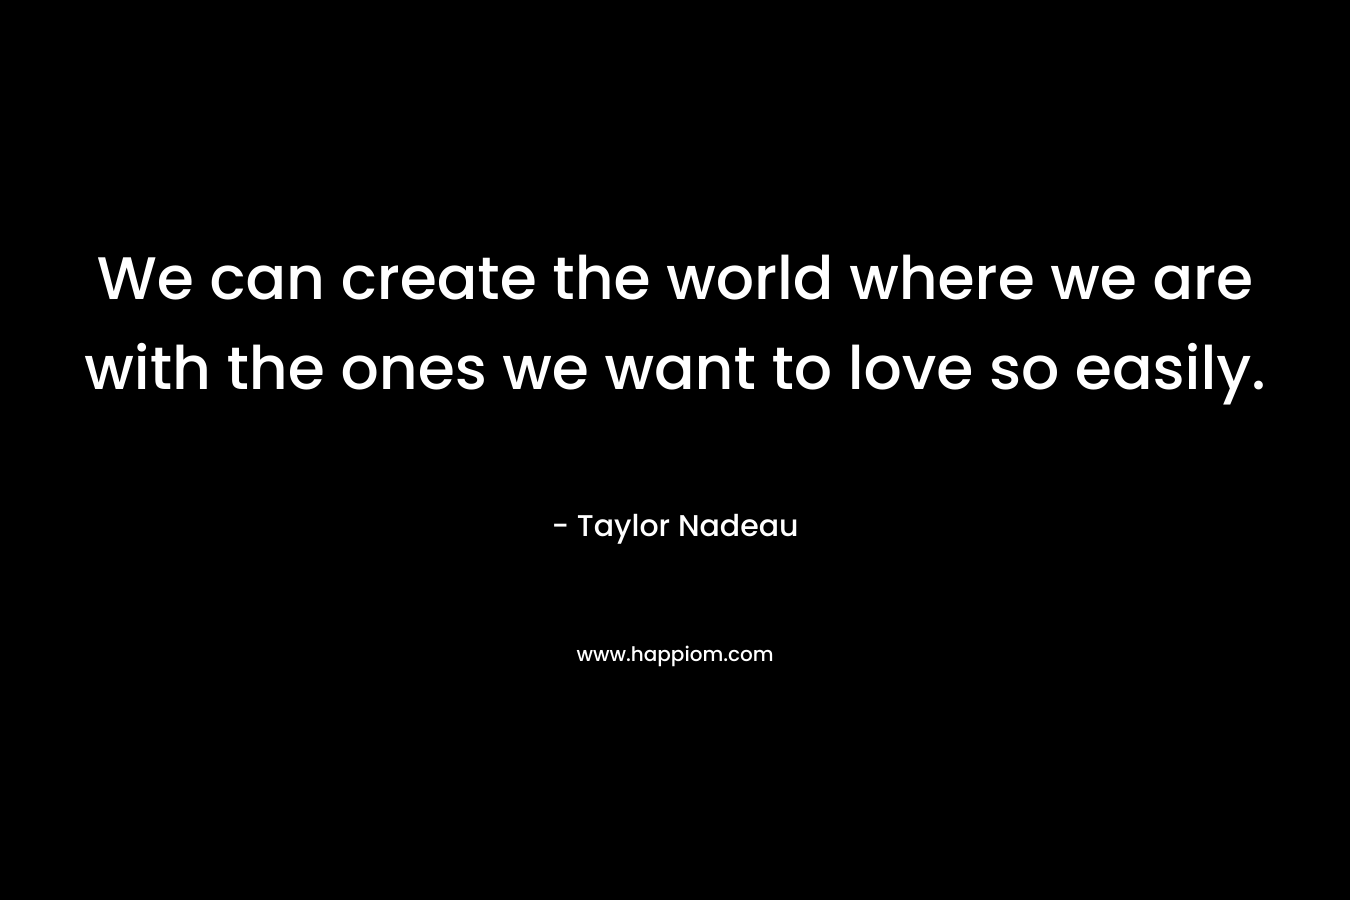 We can create the world where we are with the ones we want to love so easily. – Taylor Nadeau